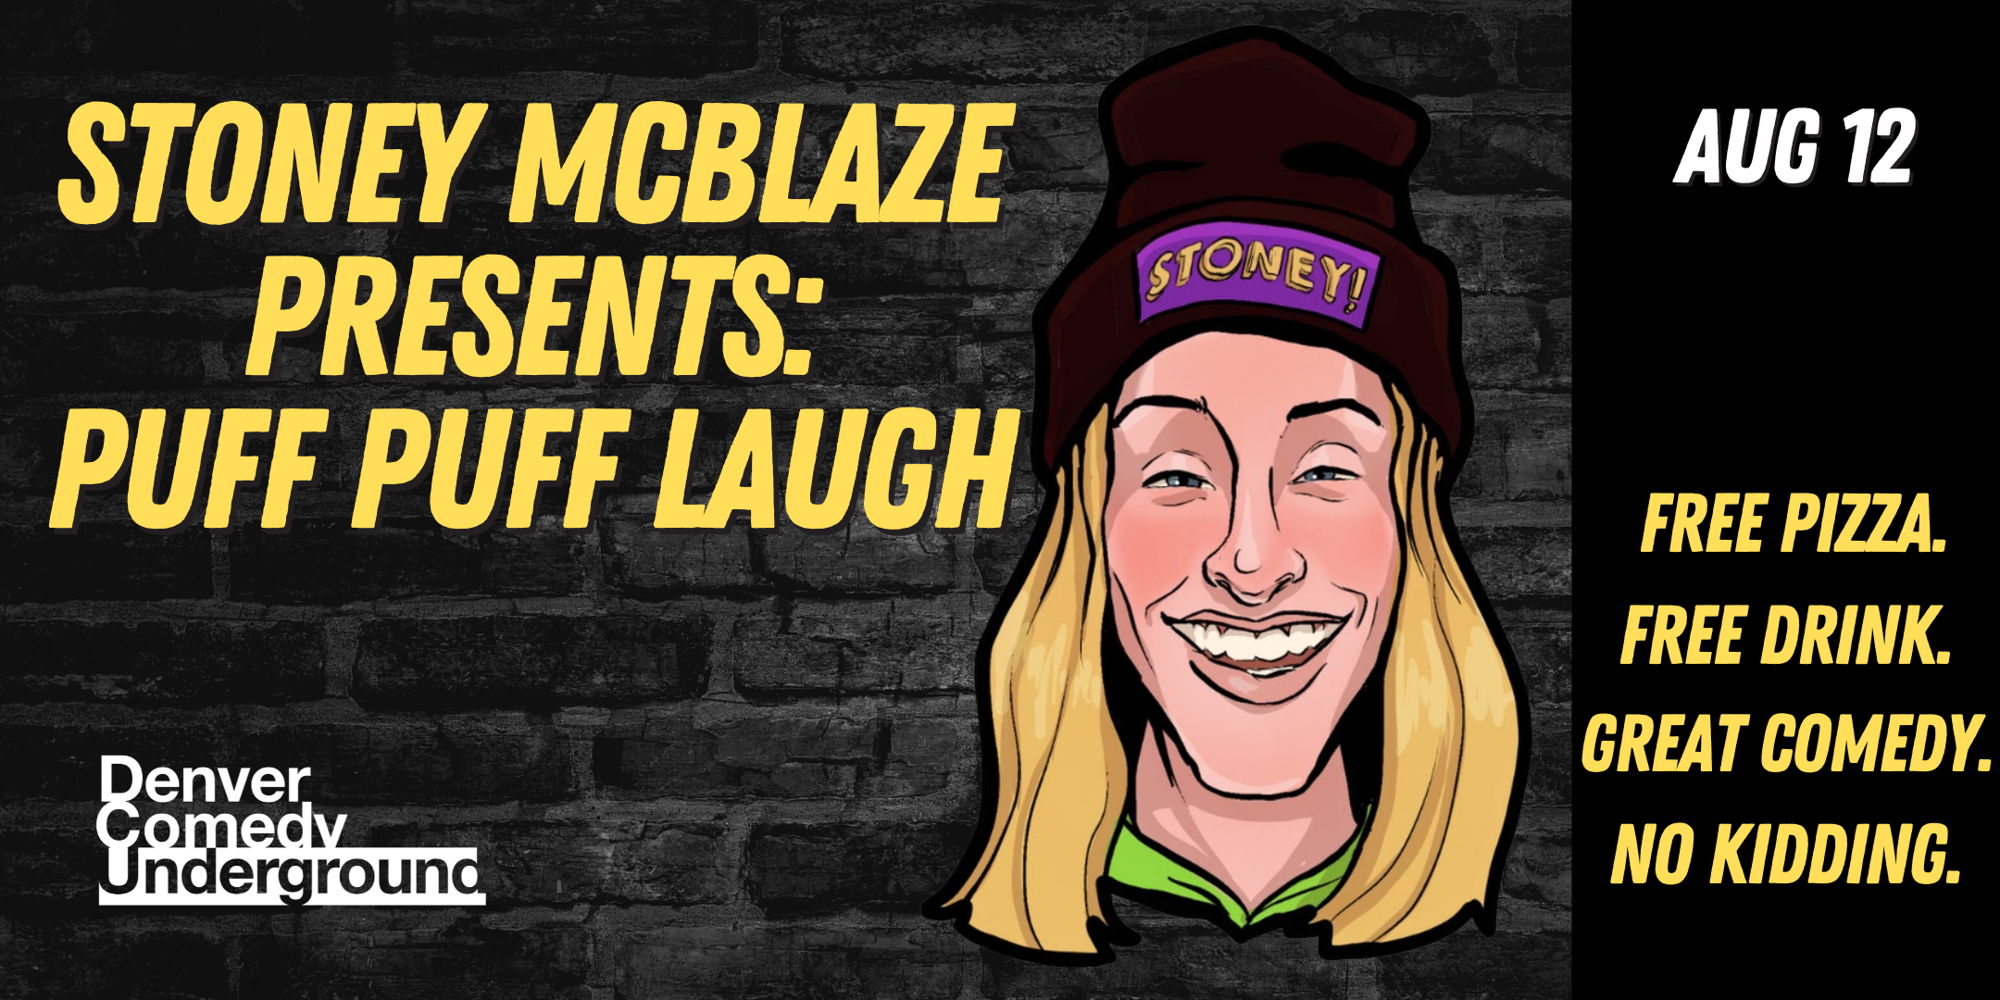 Puff Puff Laugh presented by Stoney McBlaze at Denver Comedy Underground! Free Drink, Free Pizza, No Kidding! promotional image